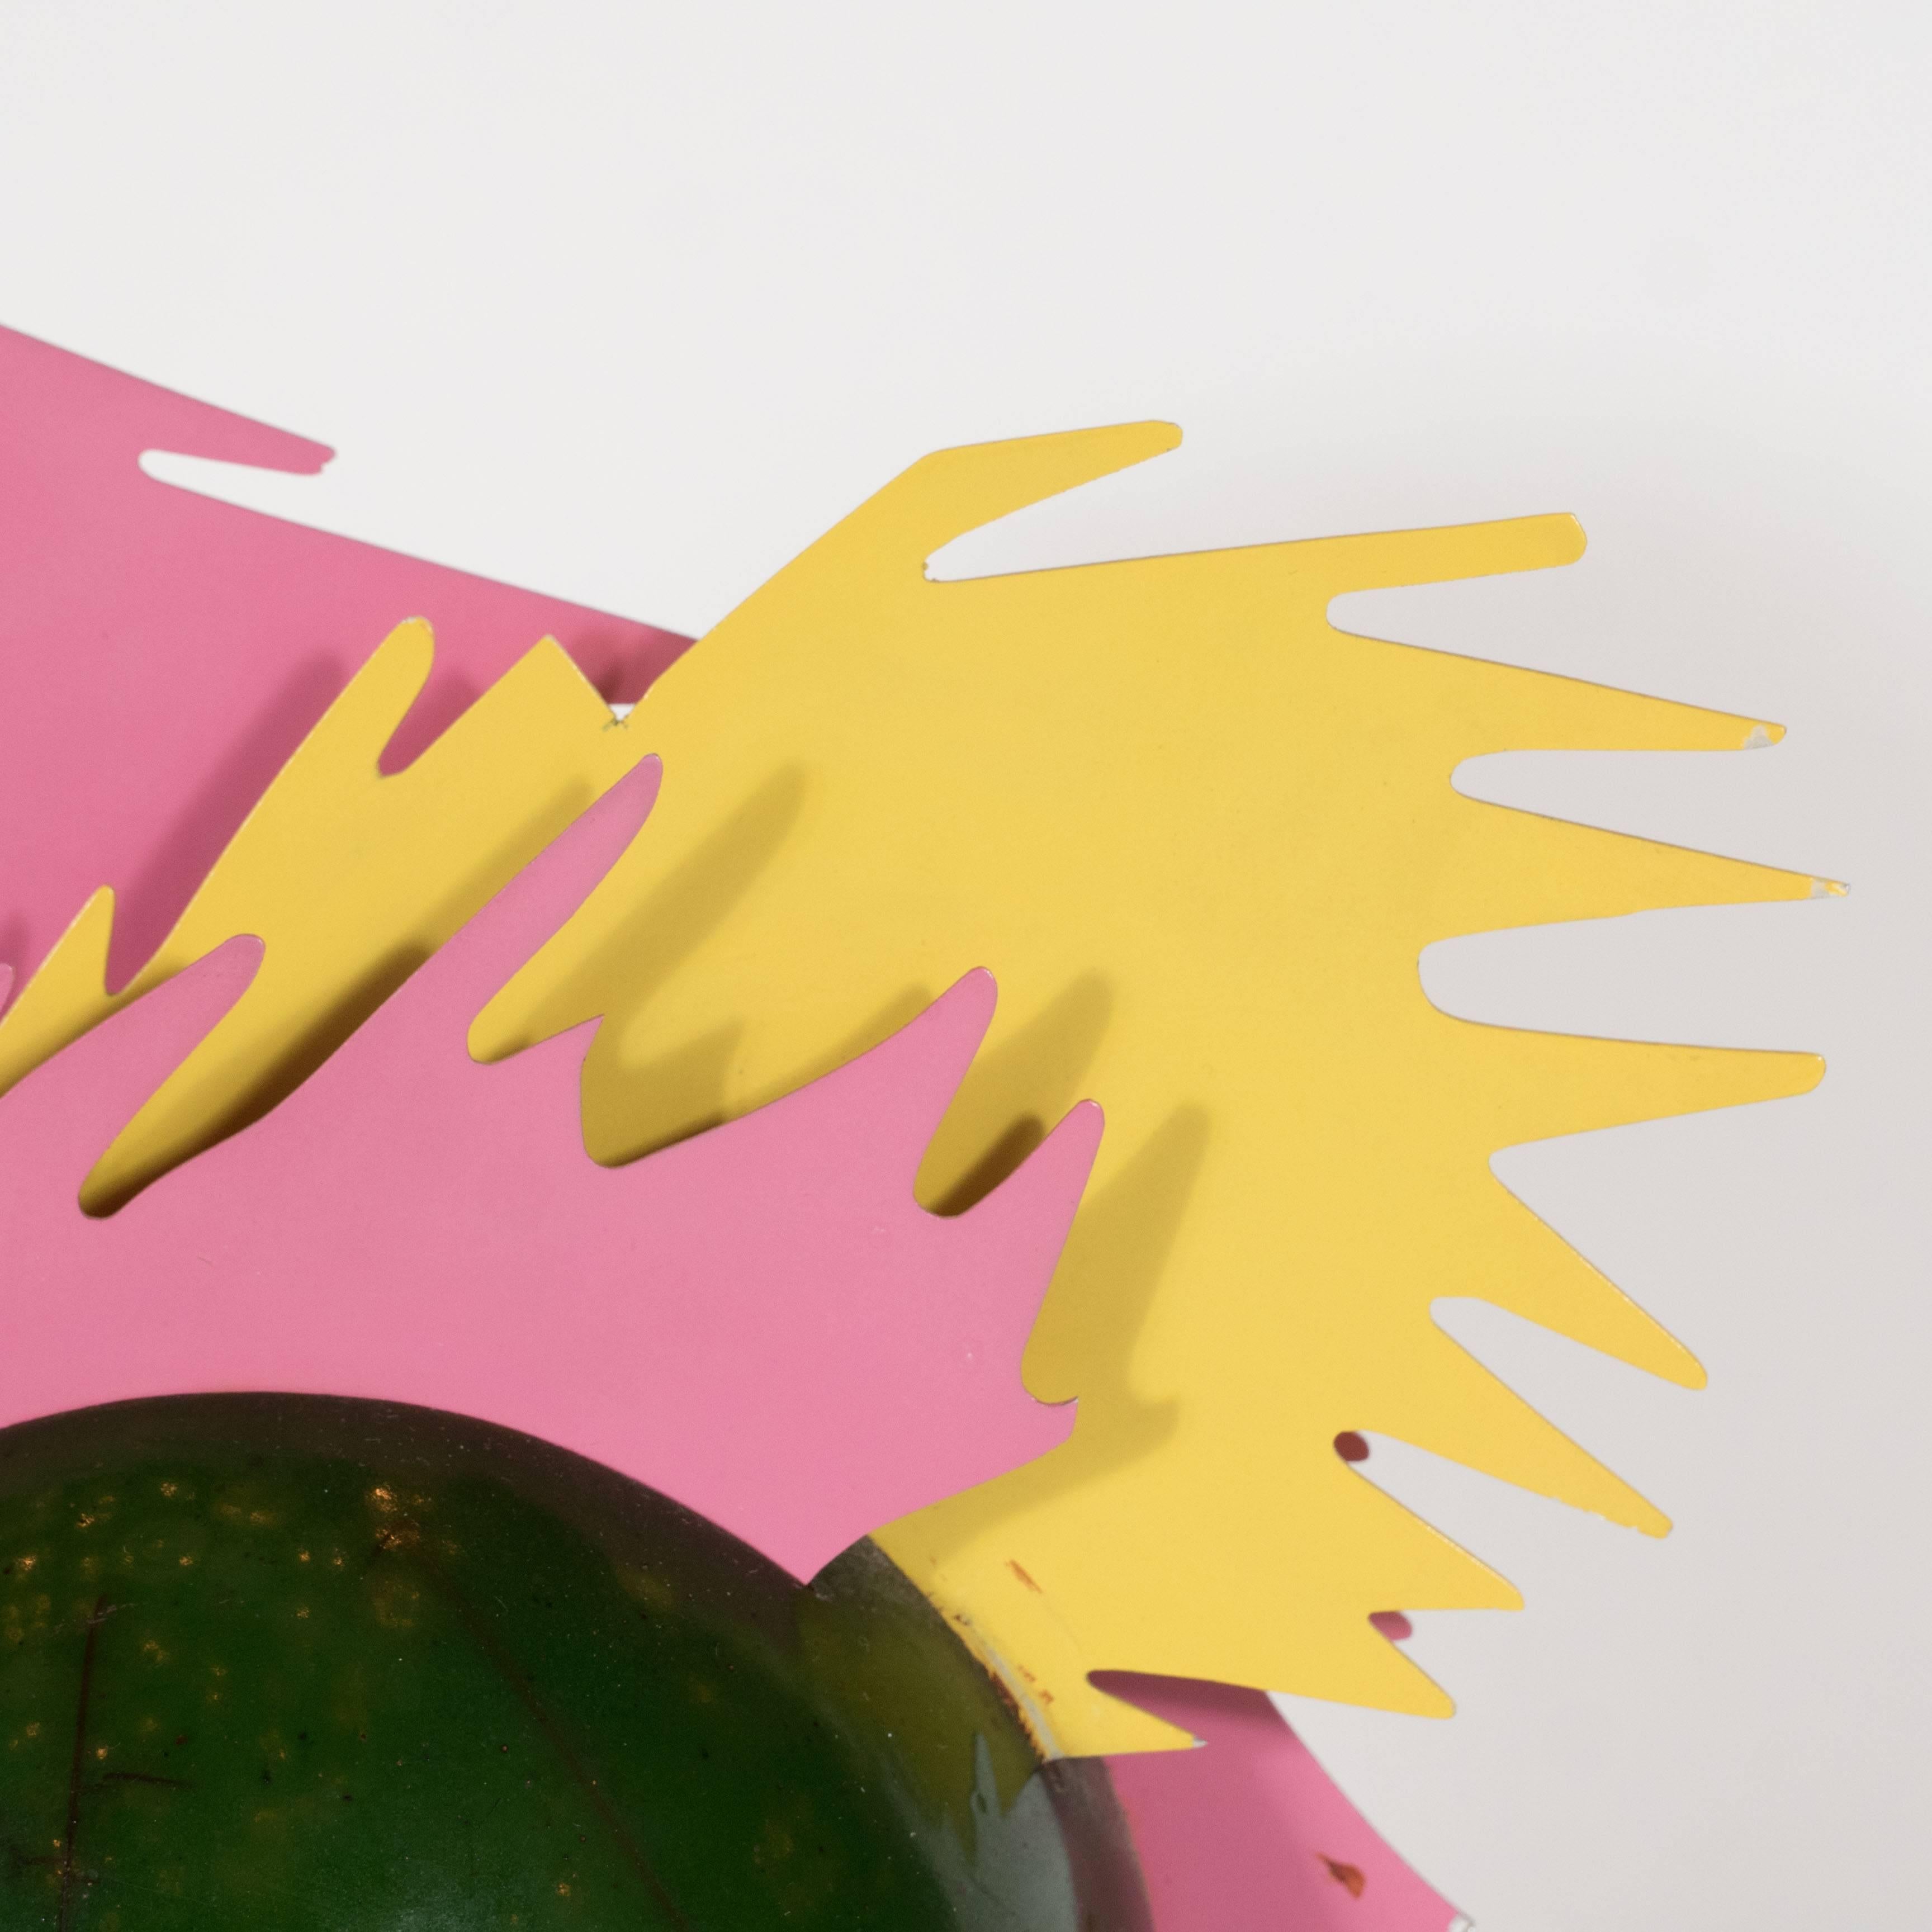 Mid-20th Century Enameled Resin and Metal Pop Art Sculpture in Sunflower Yellow, Bubble Gum Pink